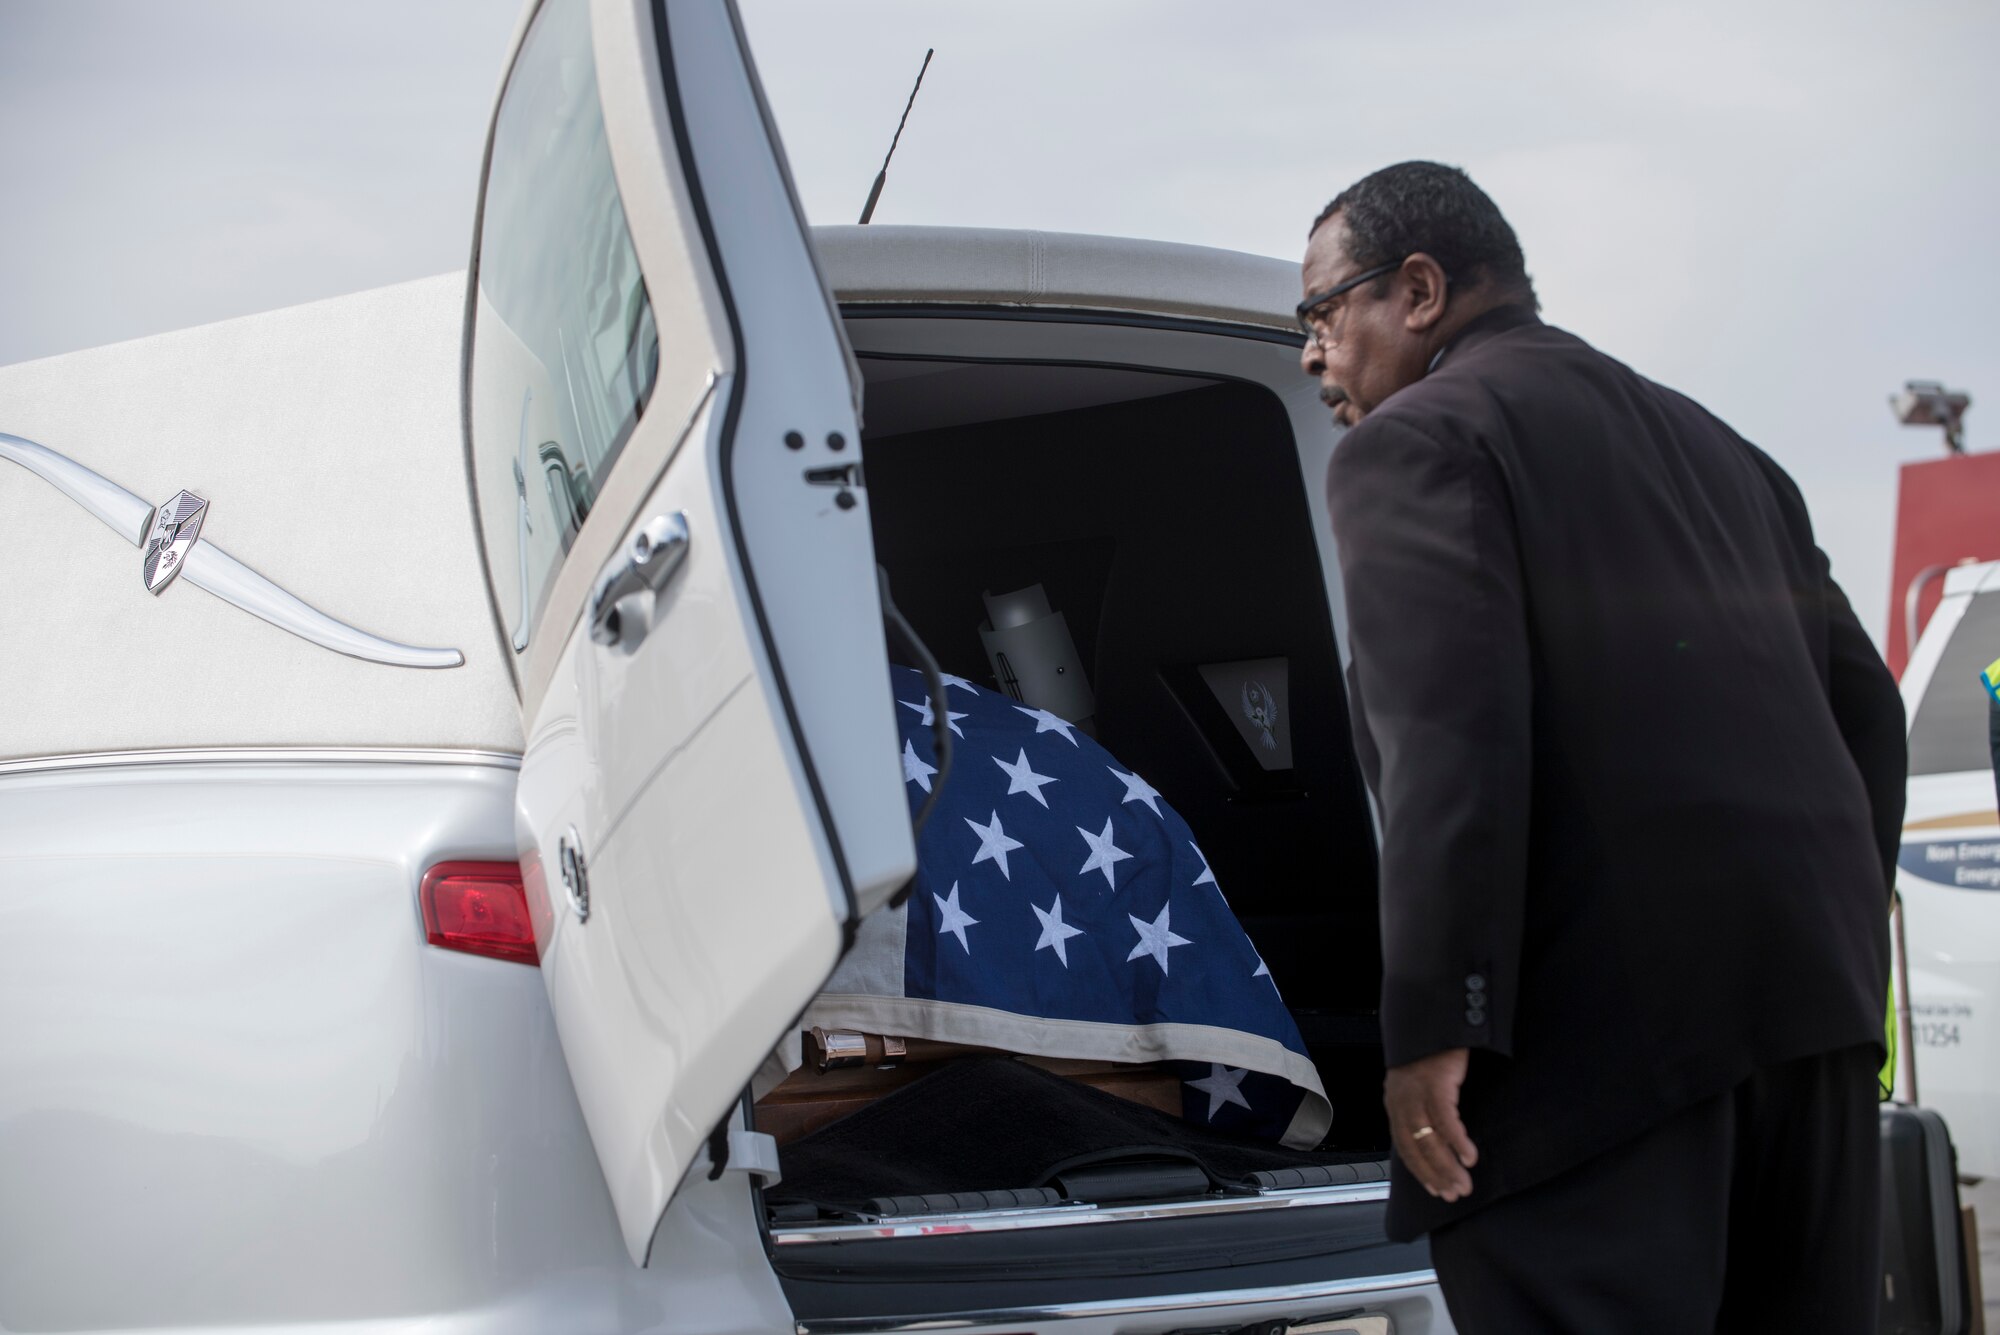 A fallen Marine is transported into a hearse during a dignified transfer May 17, 2019, at the Phoenix Sky Harbor International Airport, Ariz.